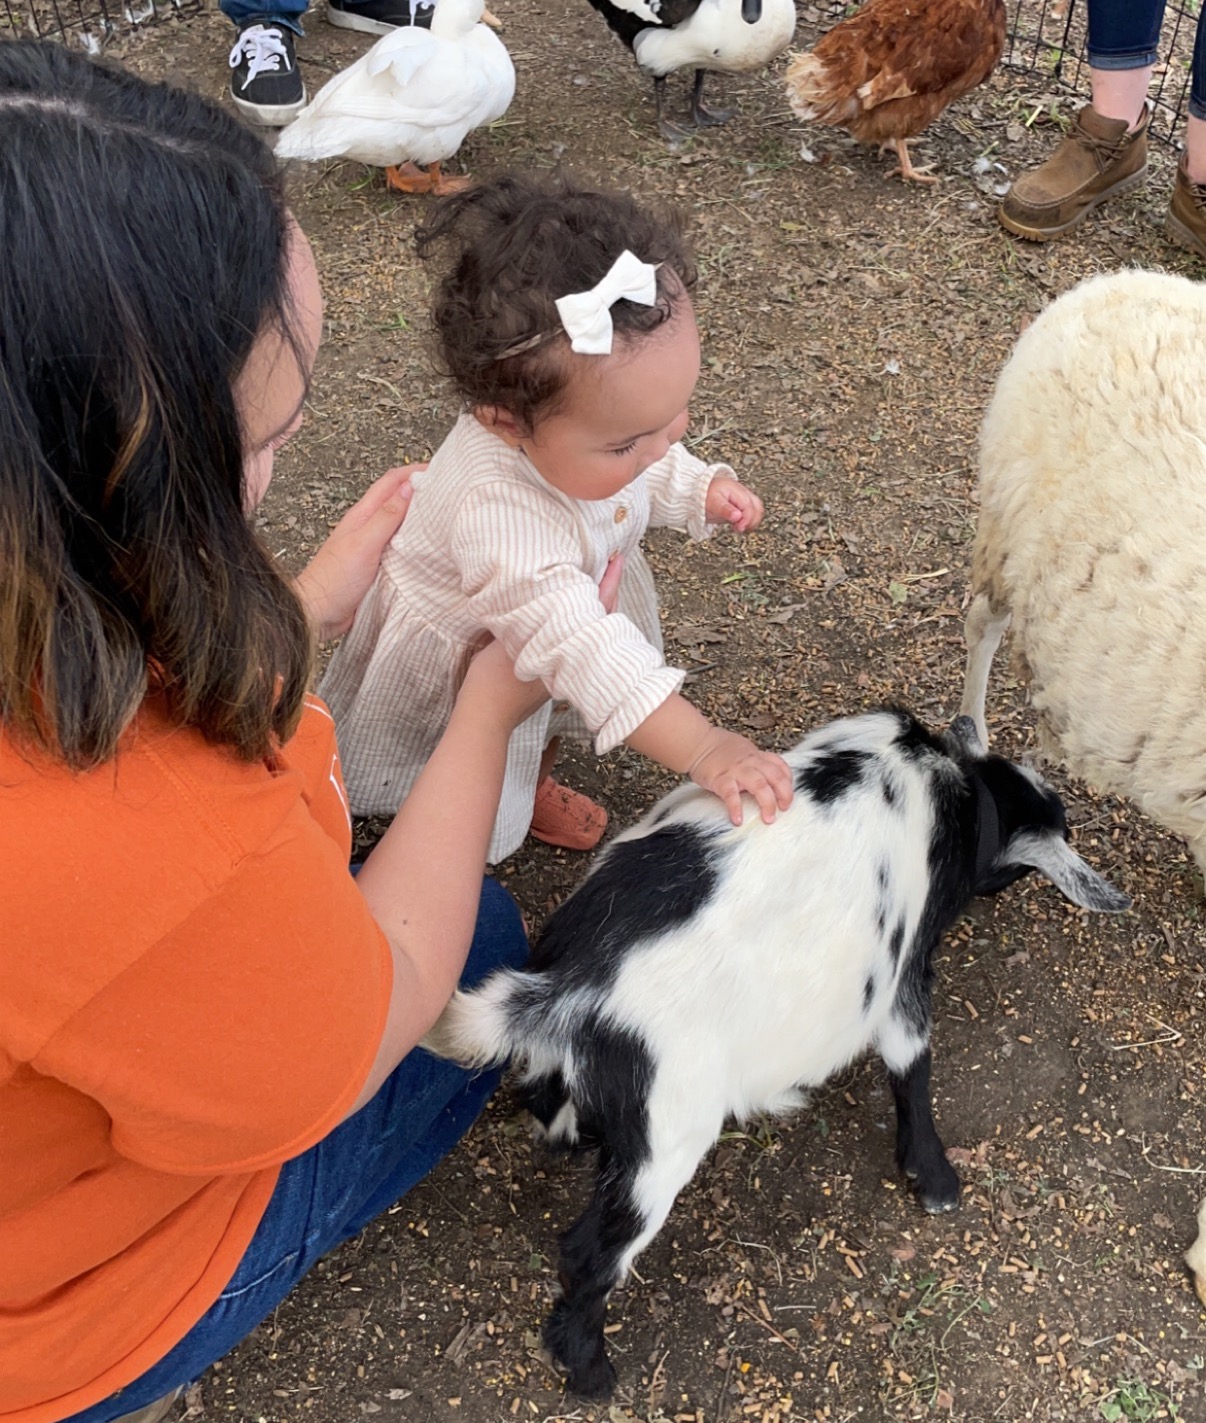 farmers market party petting zoo and activities, games and more! Take a trip to the farm